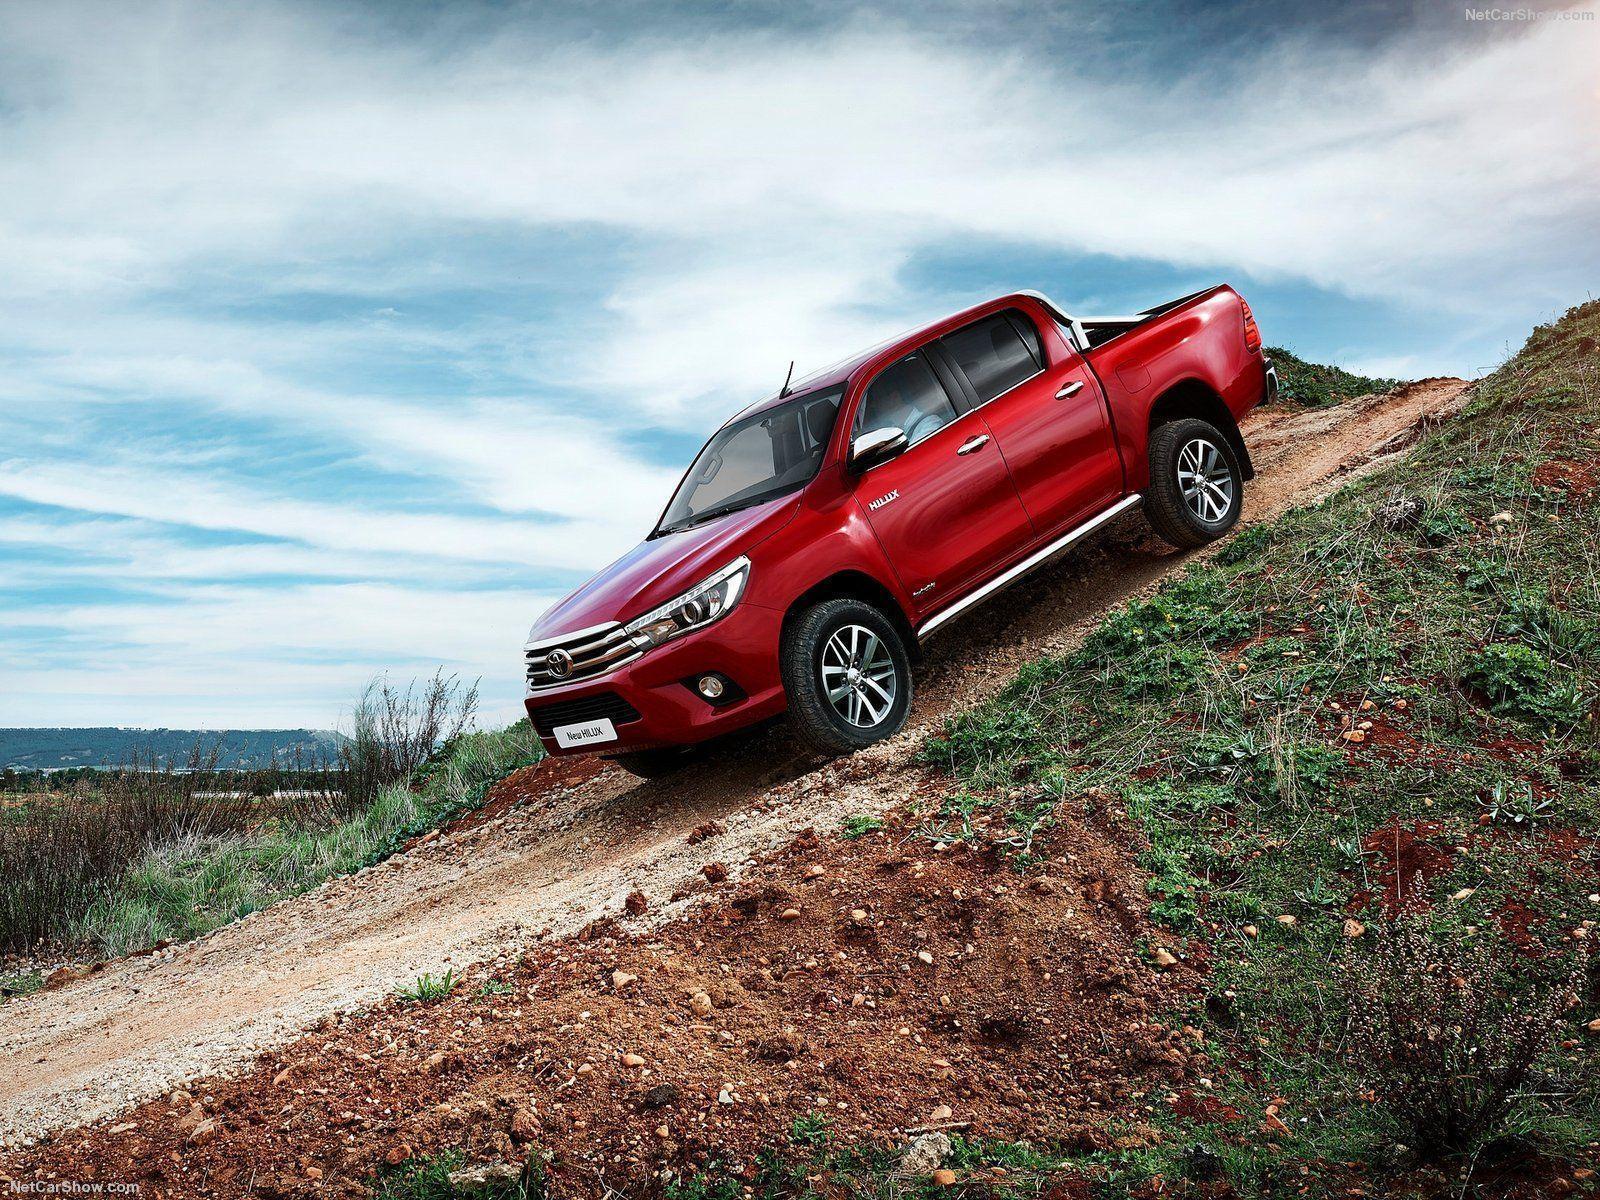 Toyota Hilux picture # 150364. Toyota photo gallery